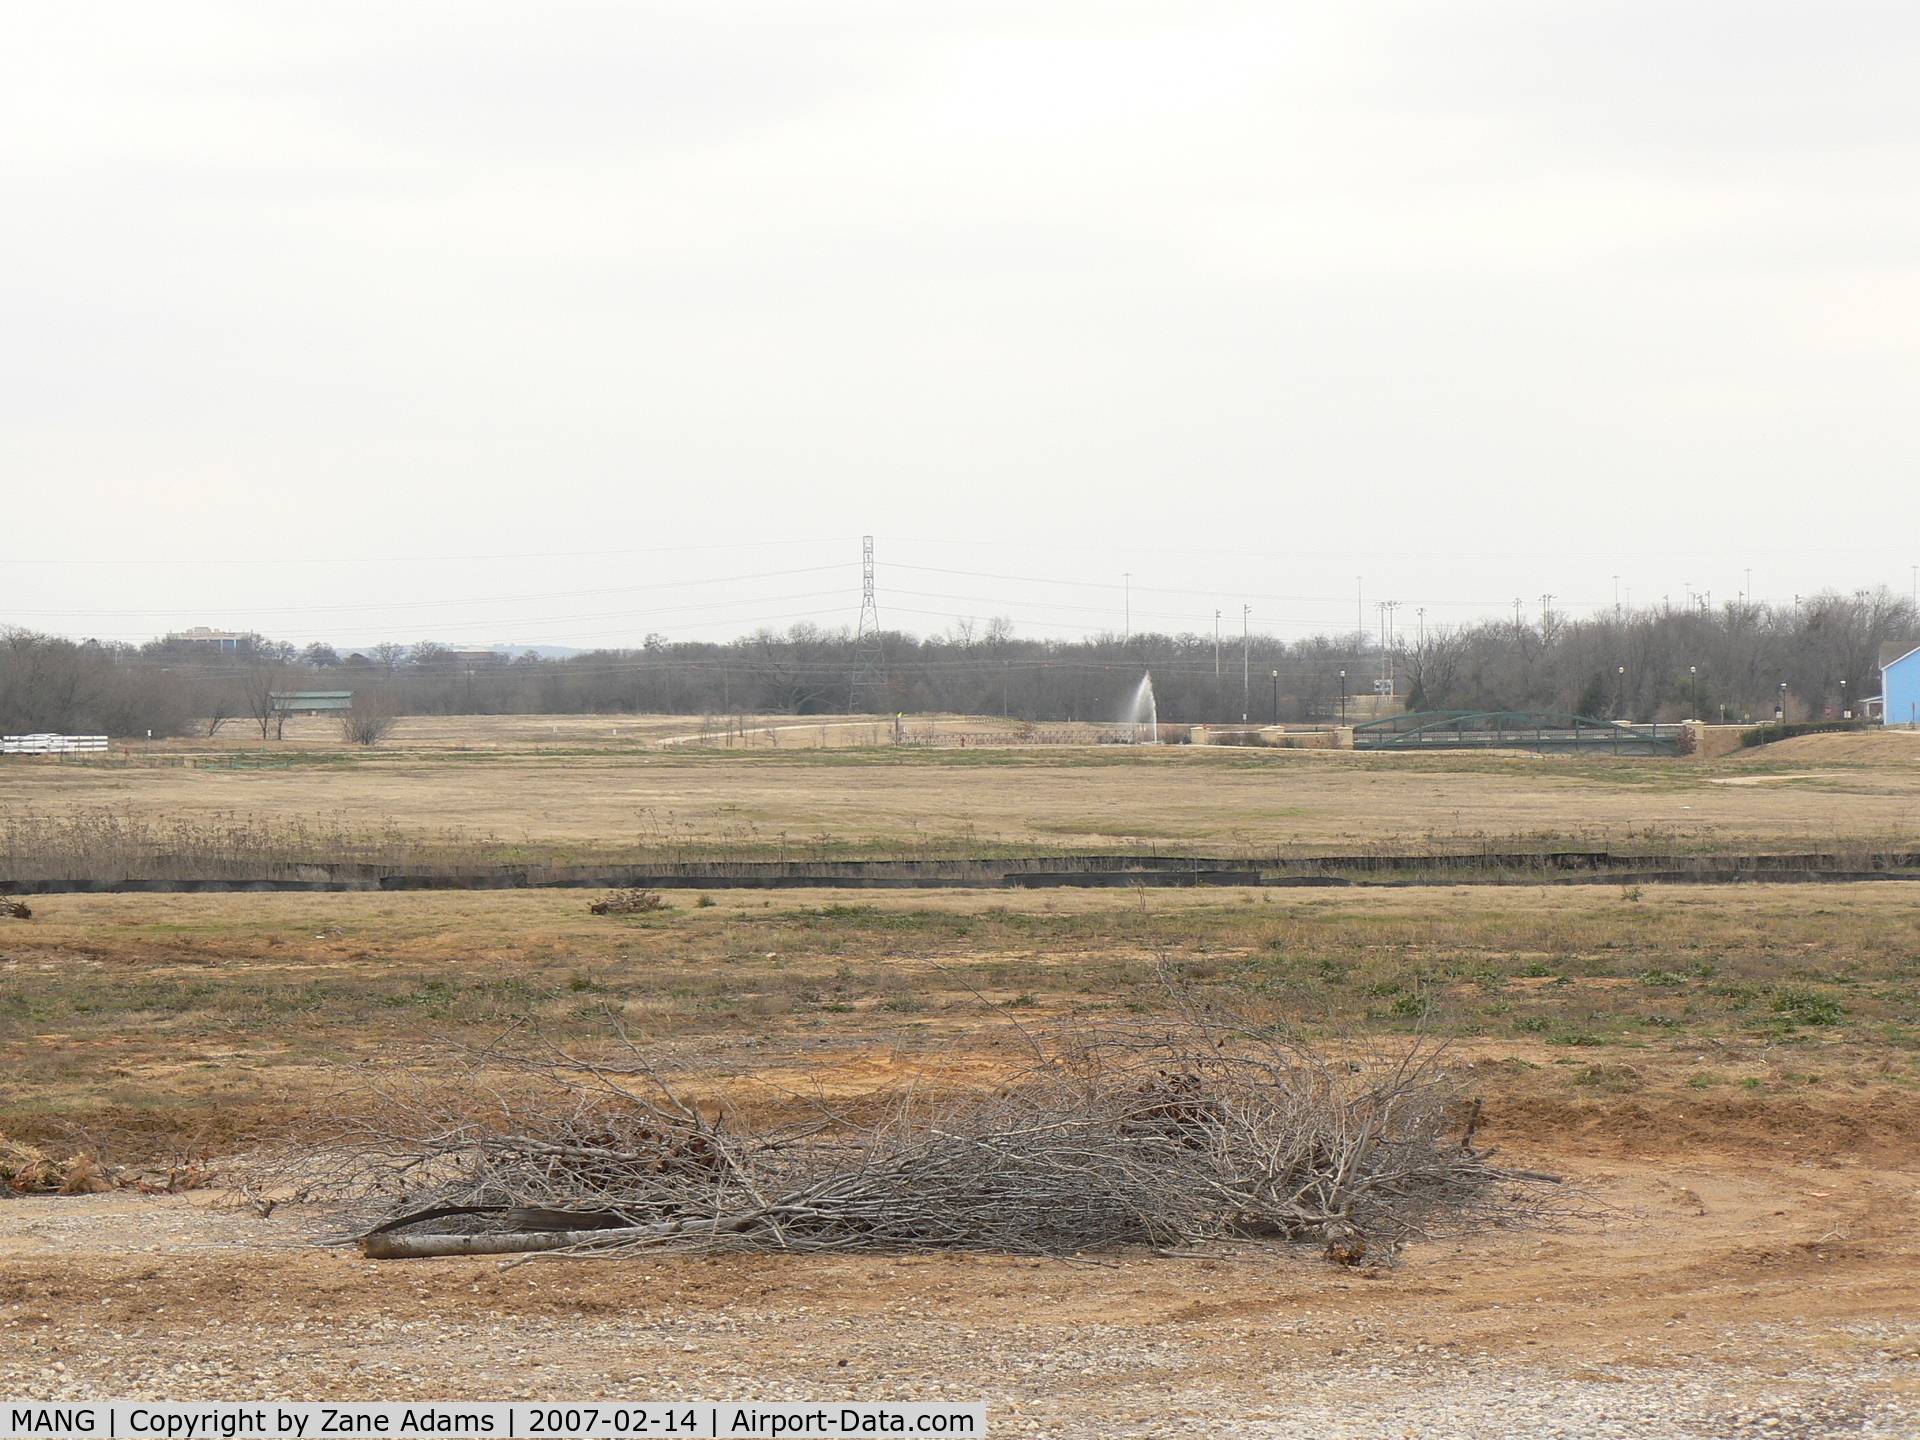 MANG Airport - Location of the former Mangham Airport - North Richland Hills, TX (Ft. Worth)